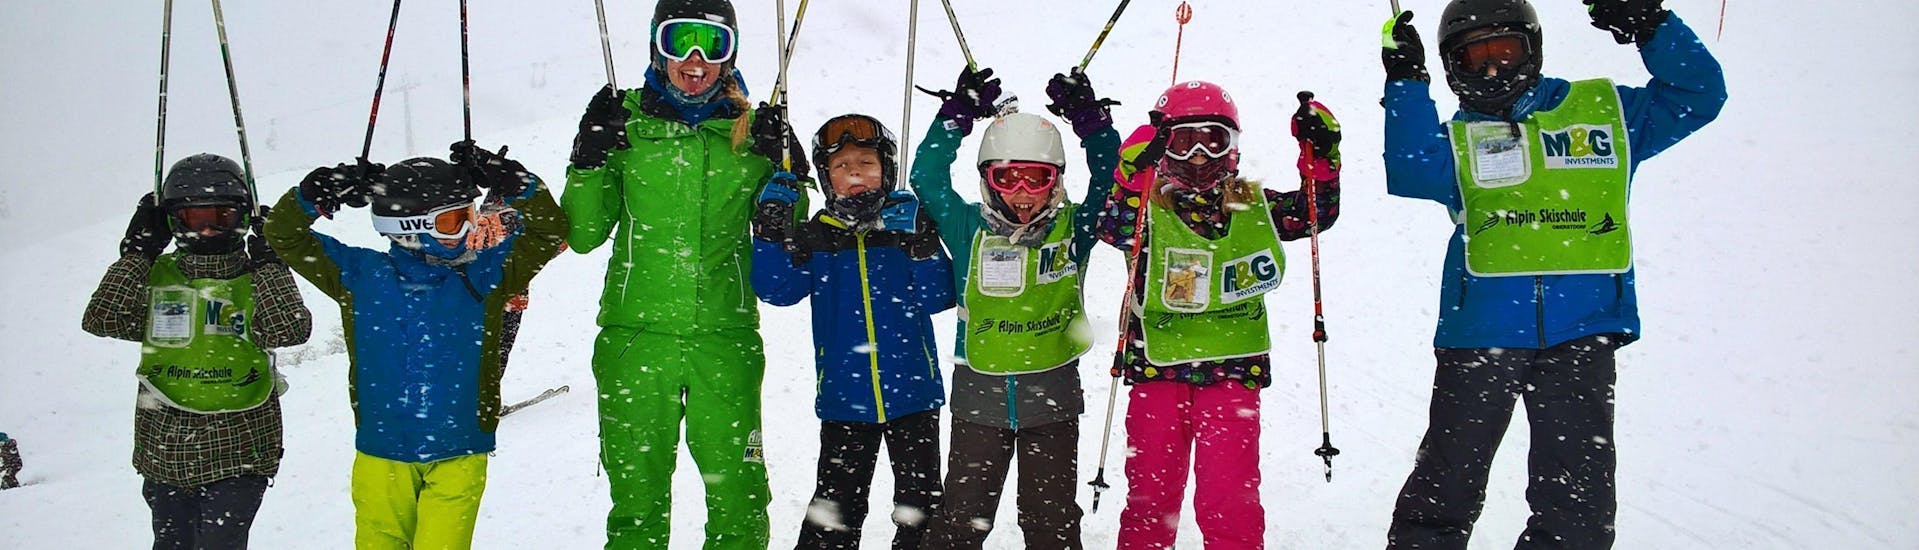 Little ski enthusiasts are having great time while learning how to ski in the ski school Alpin Skischule Oberstdorf located in the ski resort Oberstdorf.